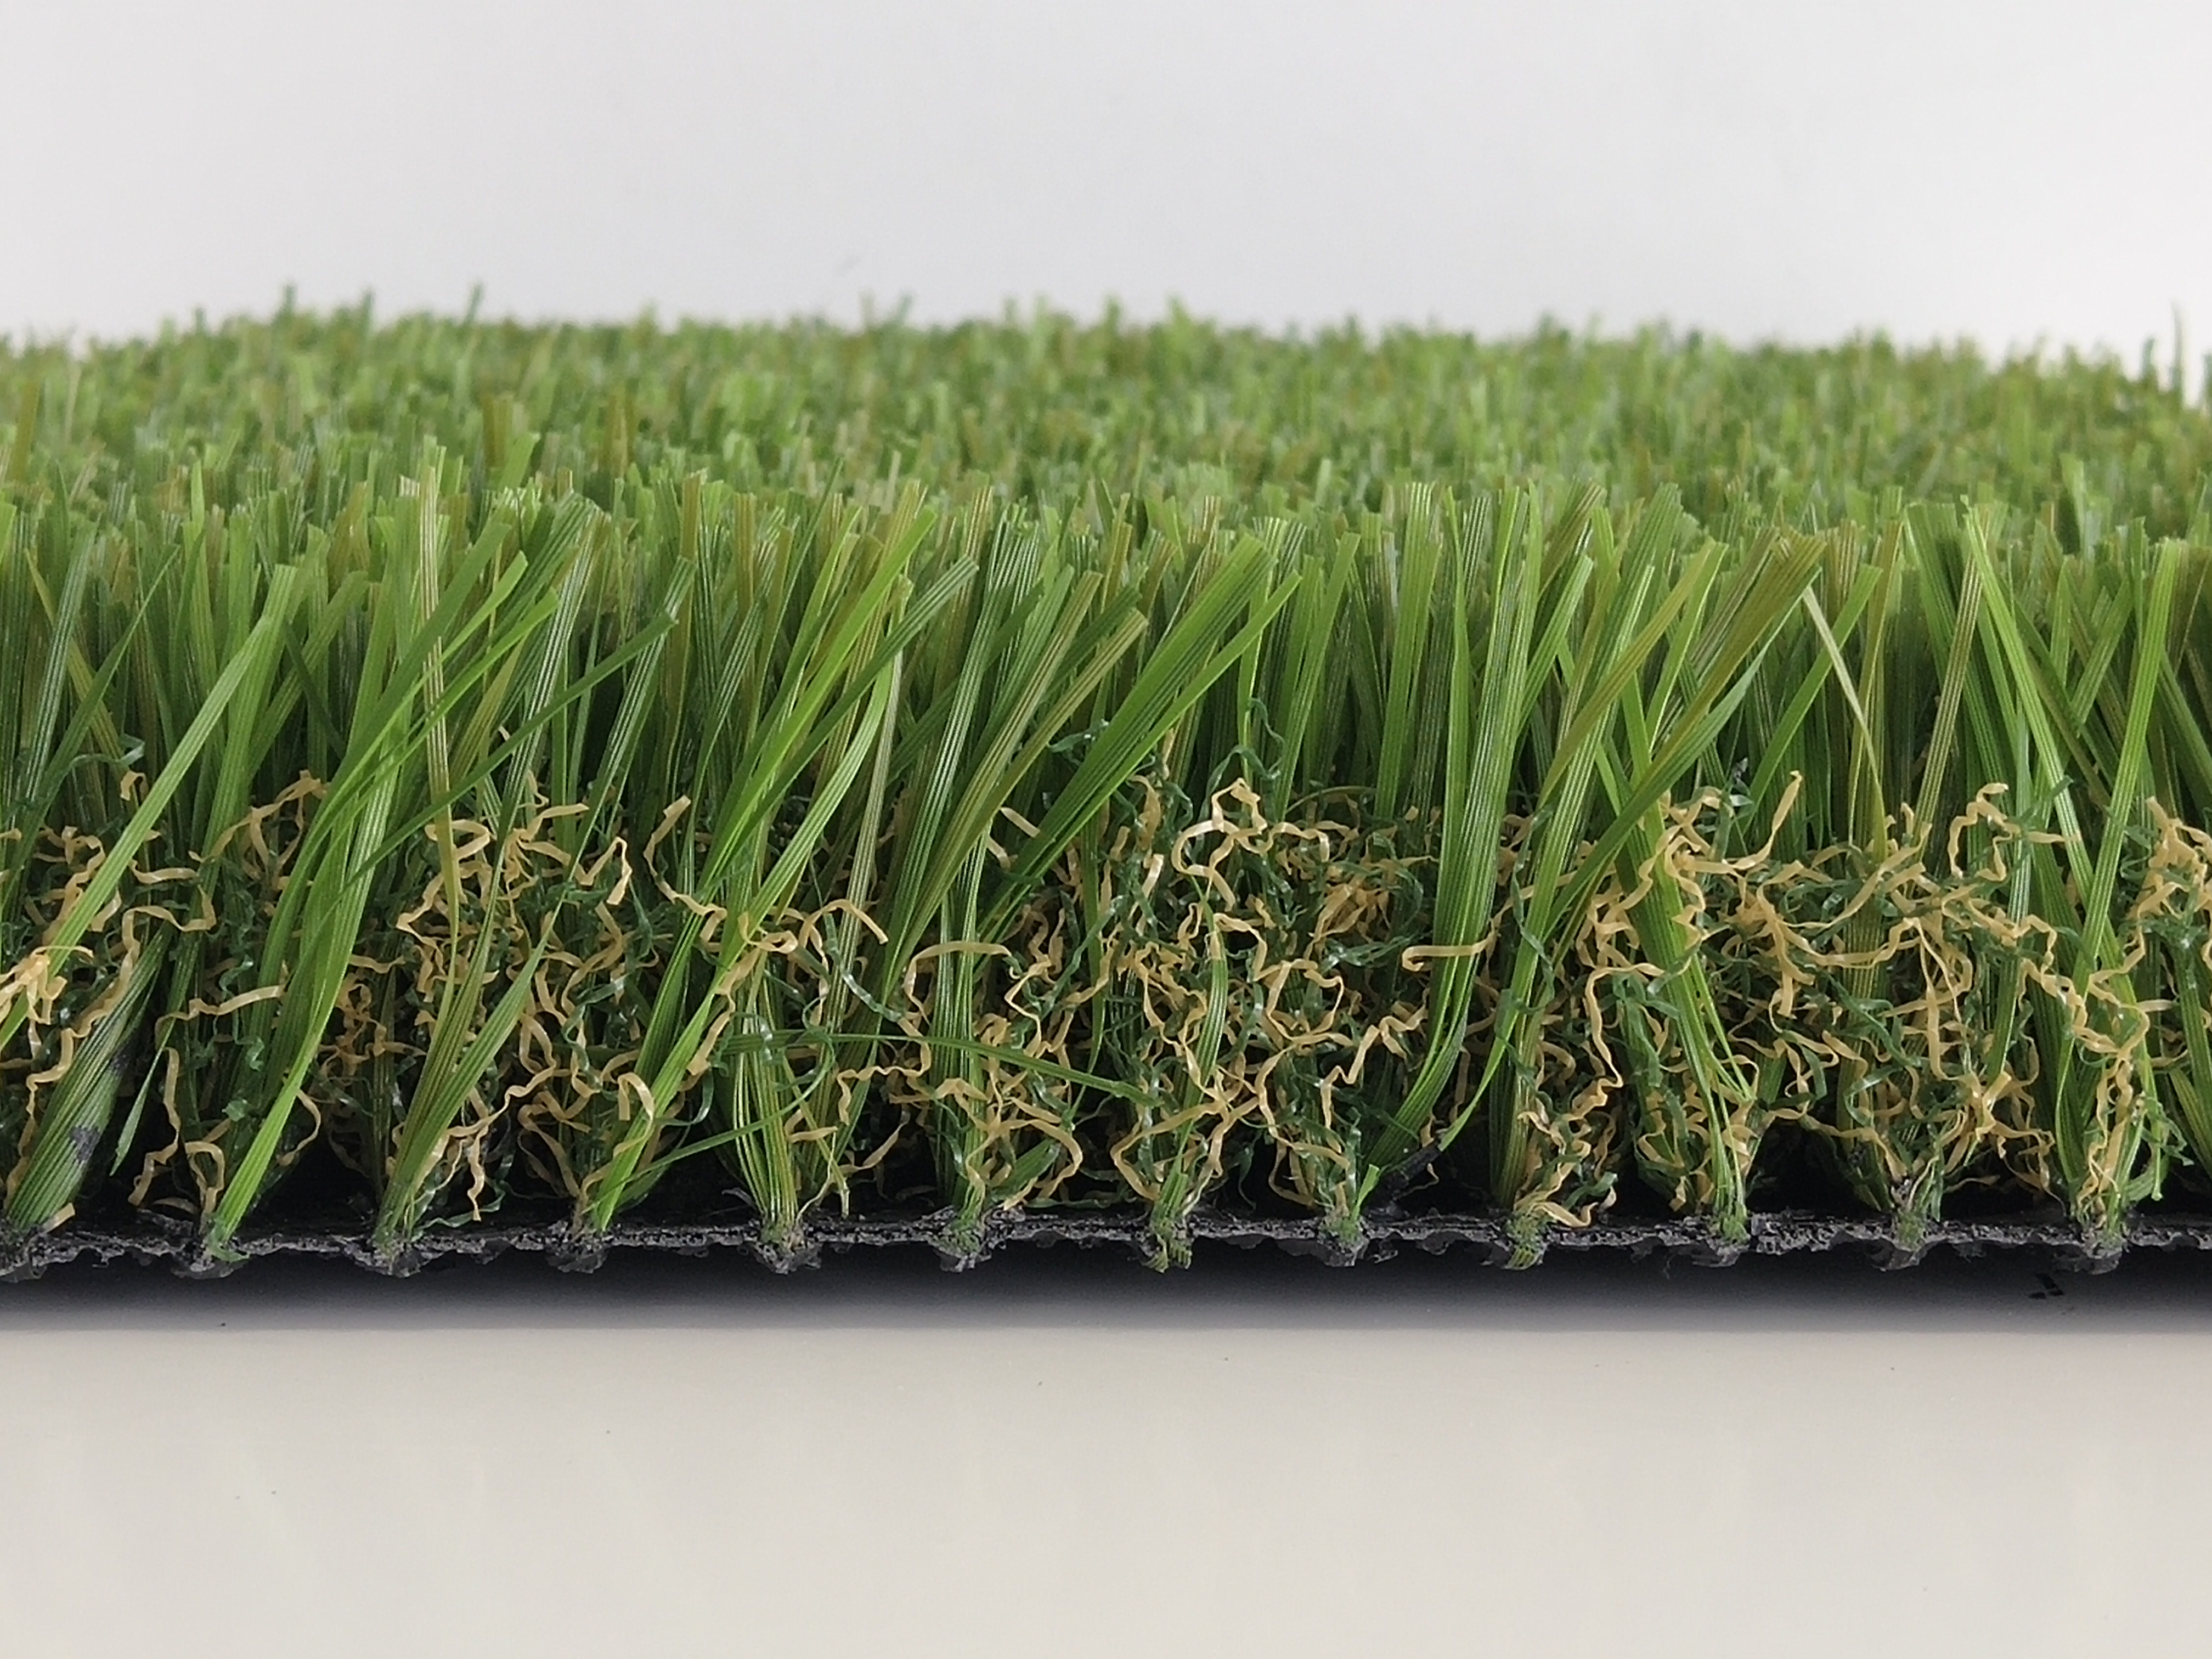 Durable abrasion resistance Landscape turf for playground